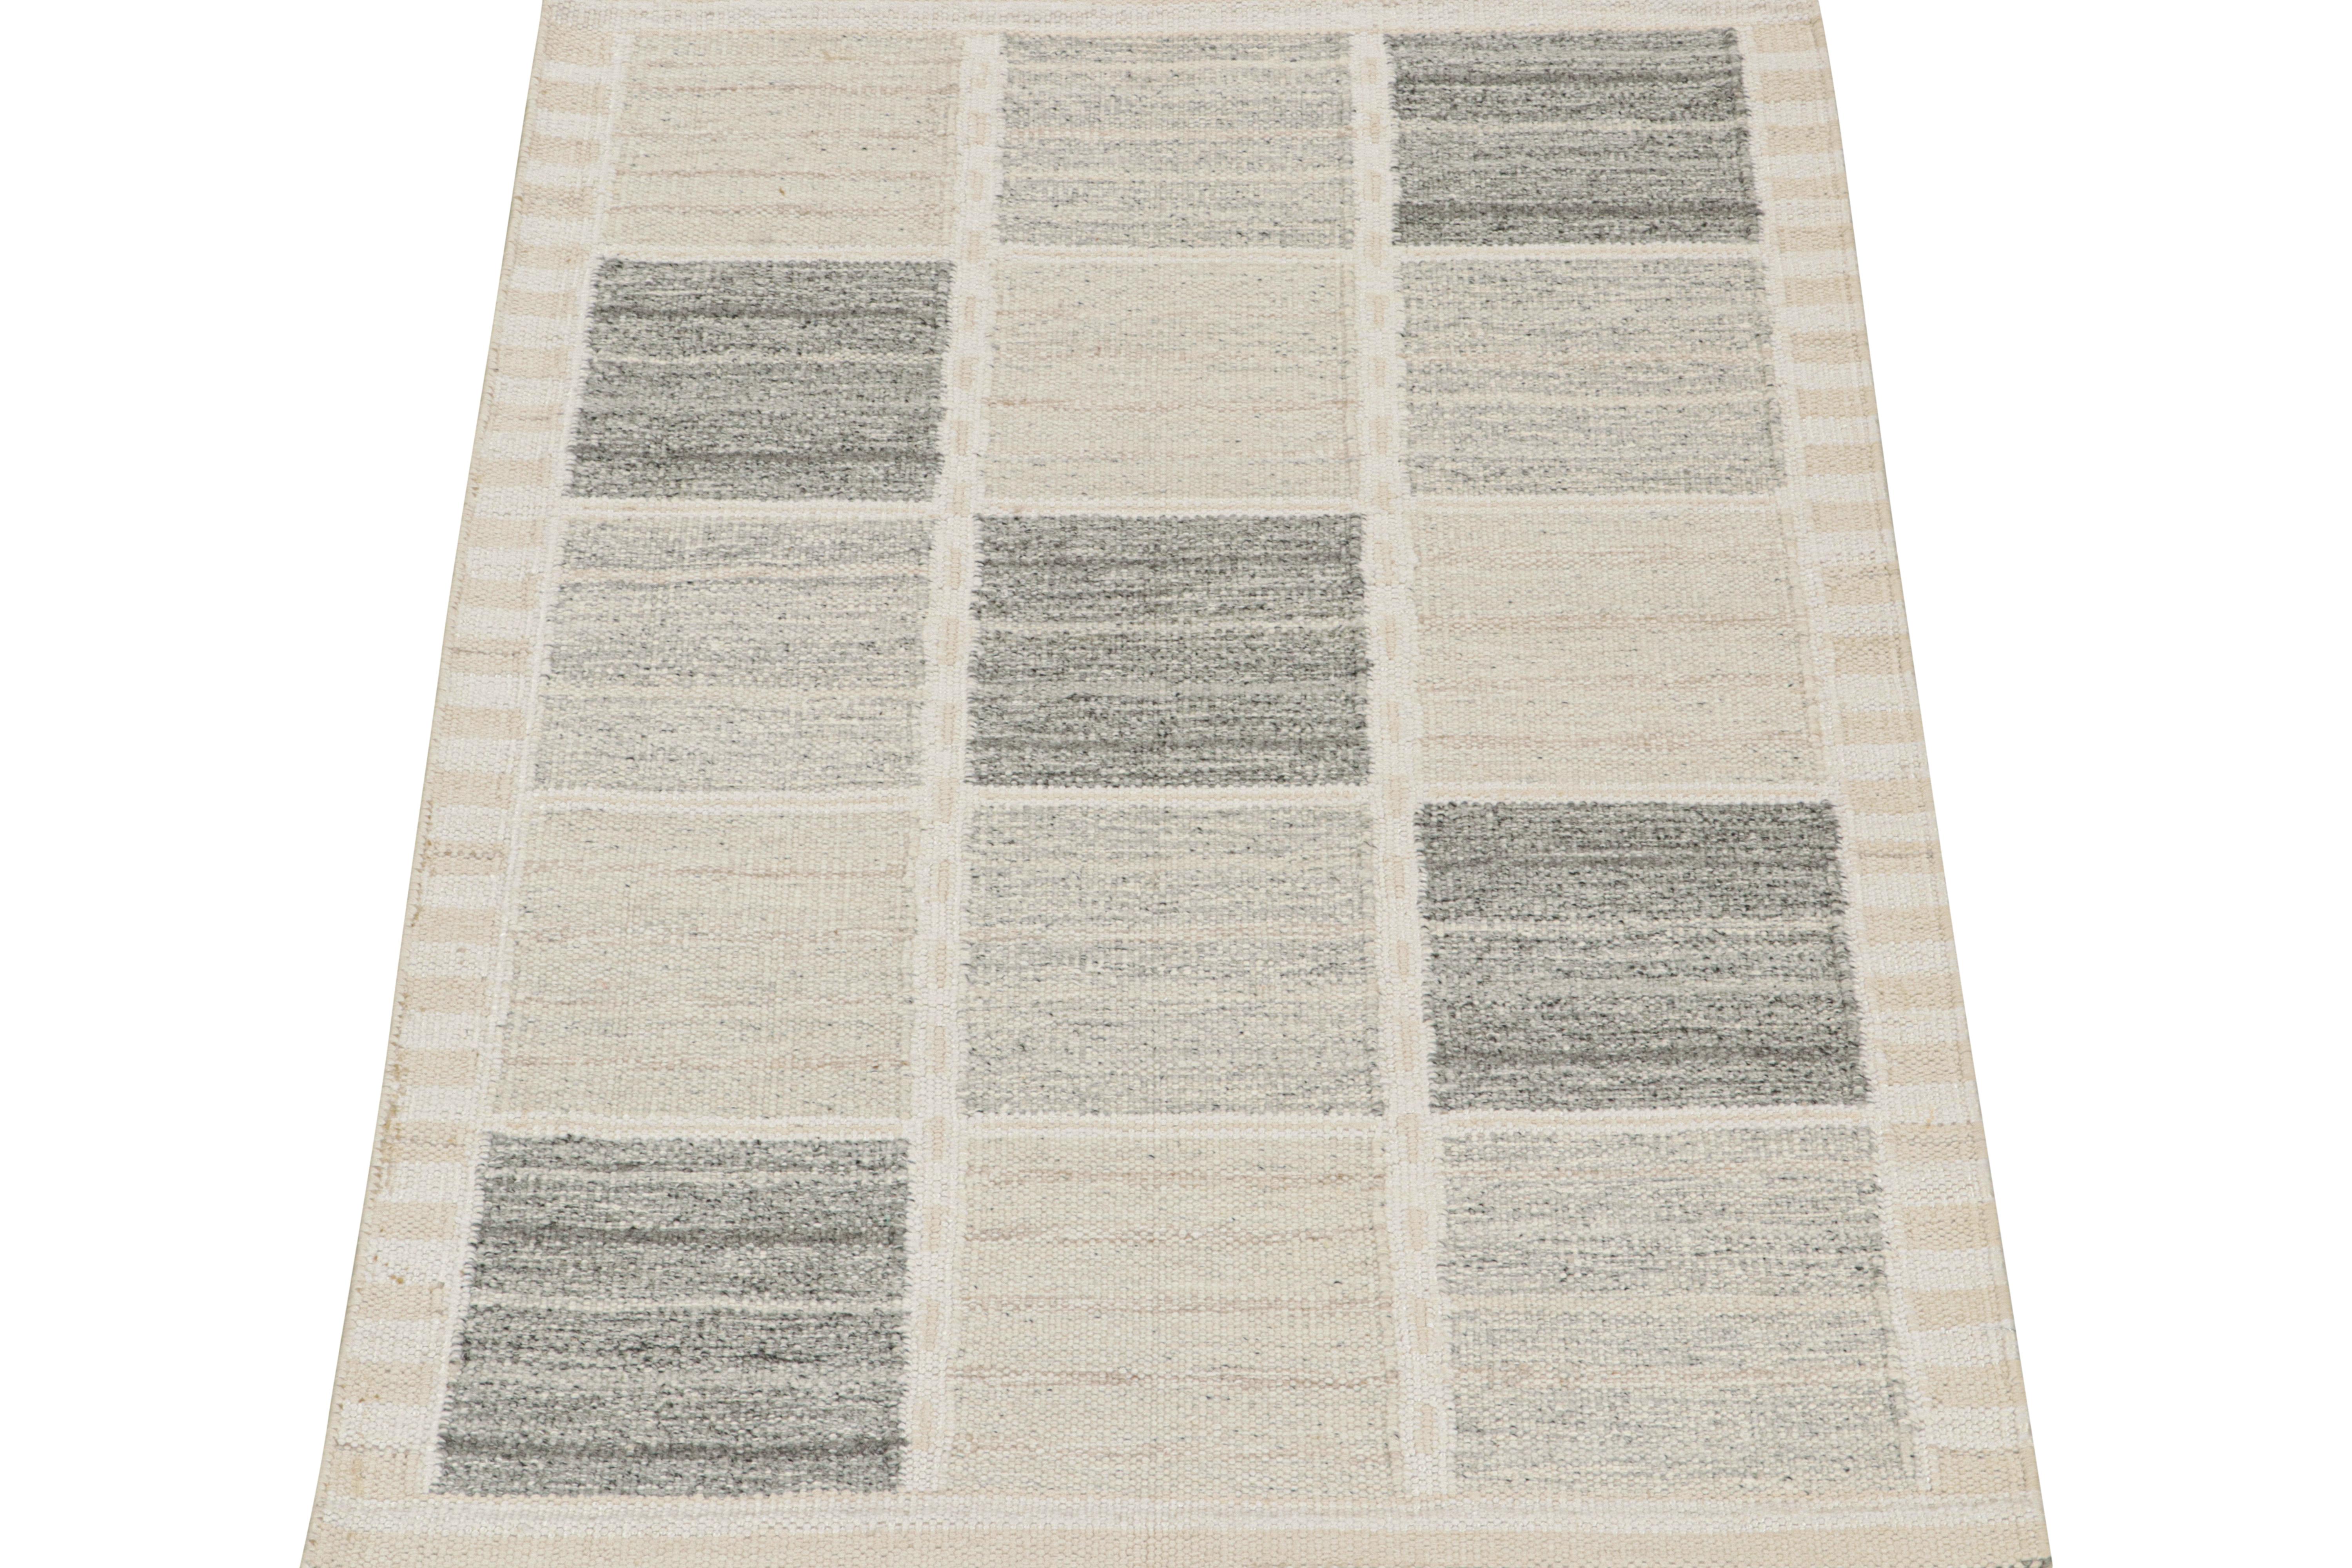 This 4x6 flat weave rug is a new addition to the Scandinavian Kilim collection by Rug & Kilim. Handwoven in wool and natural yarns, its design reflects a contemporary take on midcentury Rollakans and Swedish Deco style.

On the Design:

This new